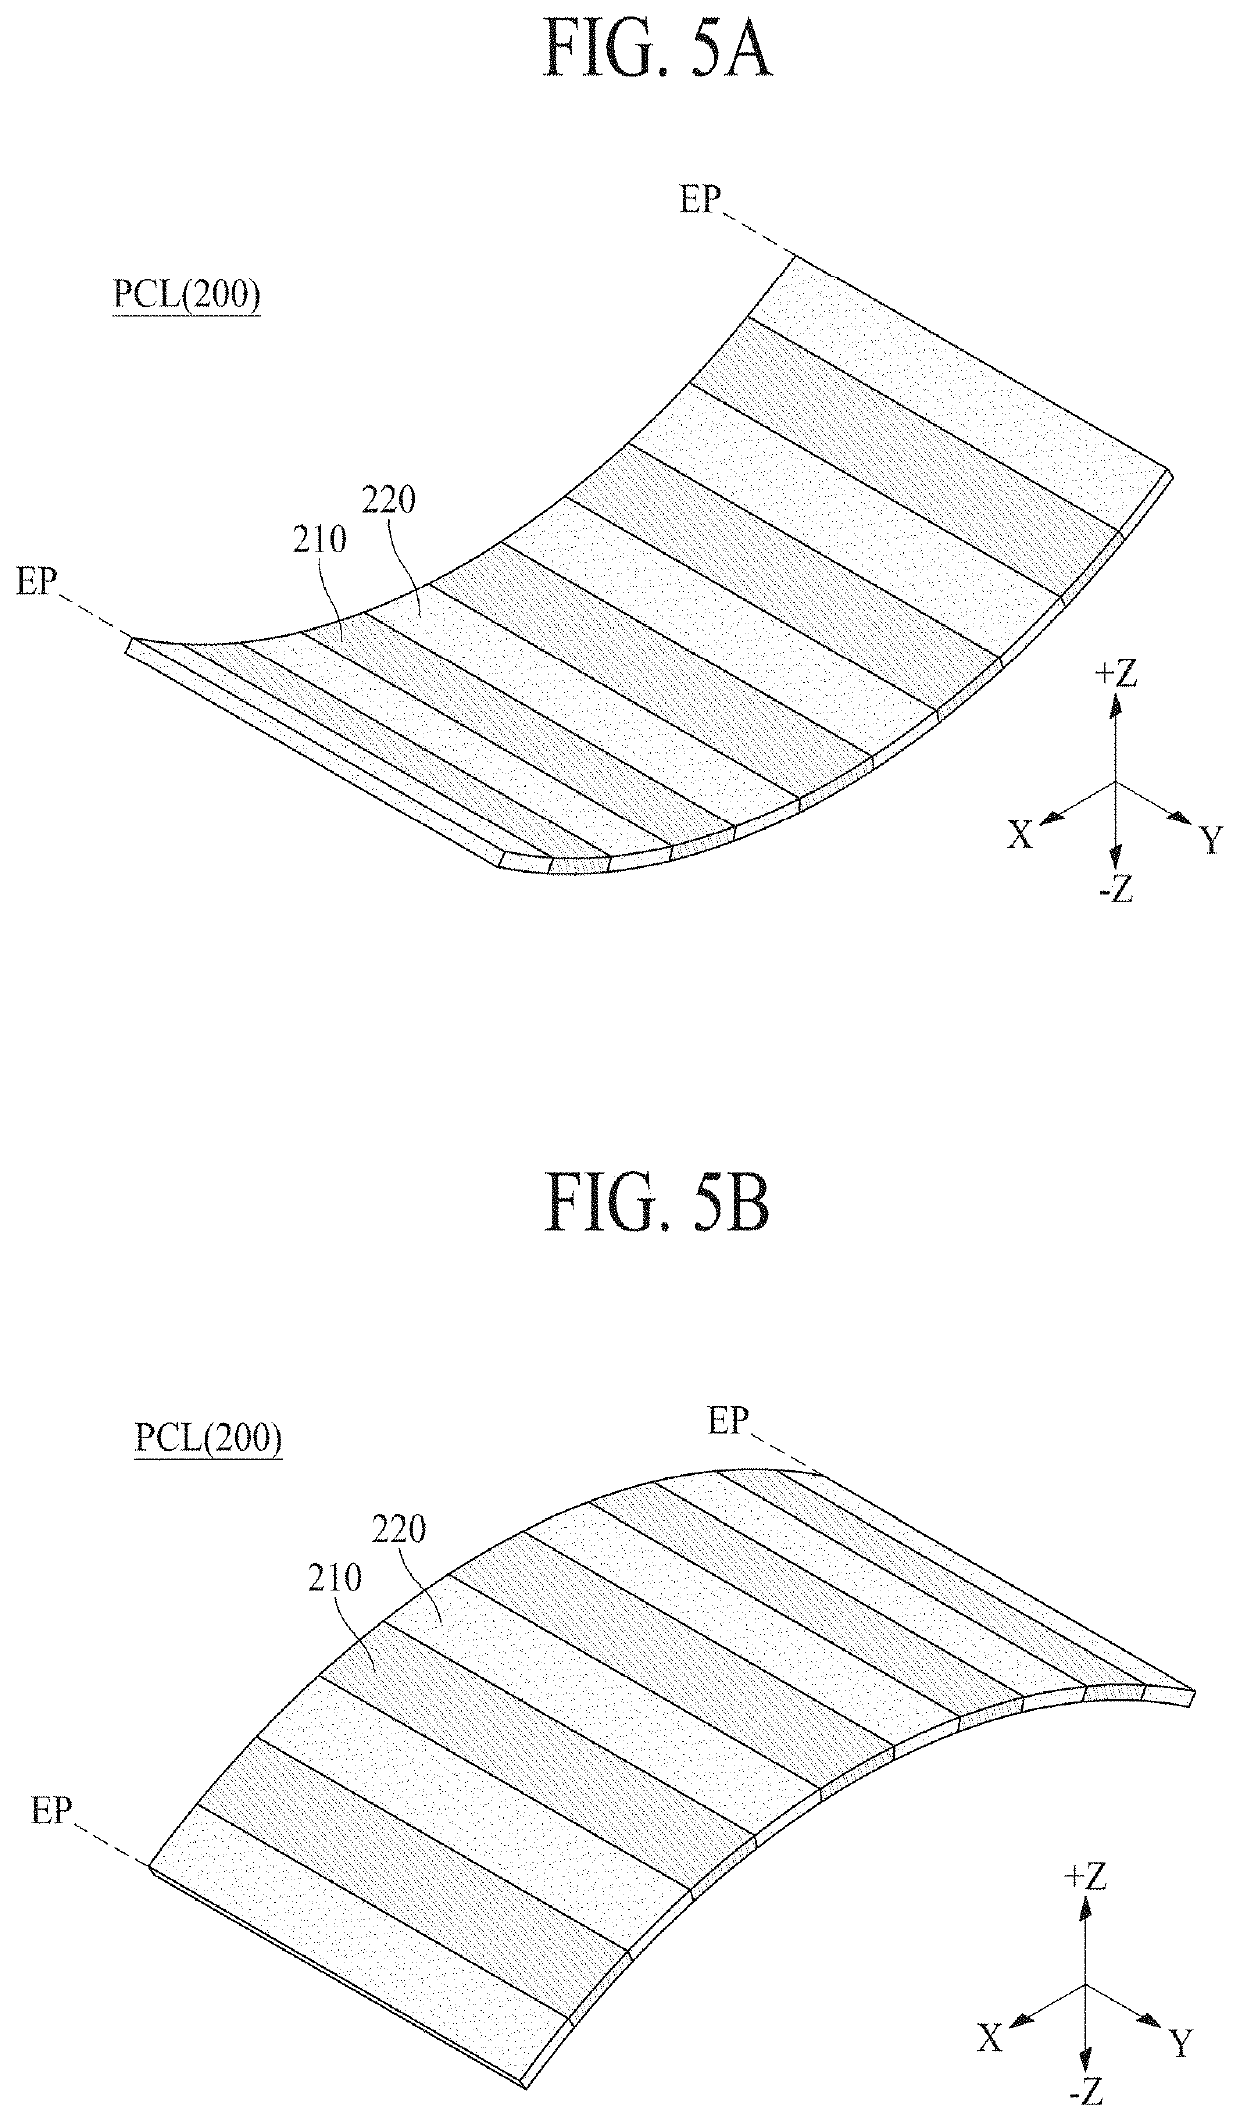 Display apparatus including flexible vibration module and method of manufacturing the flexible vibration module